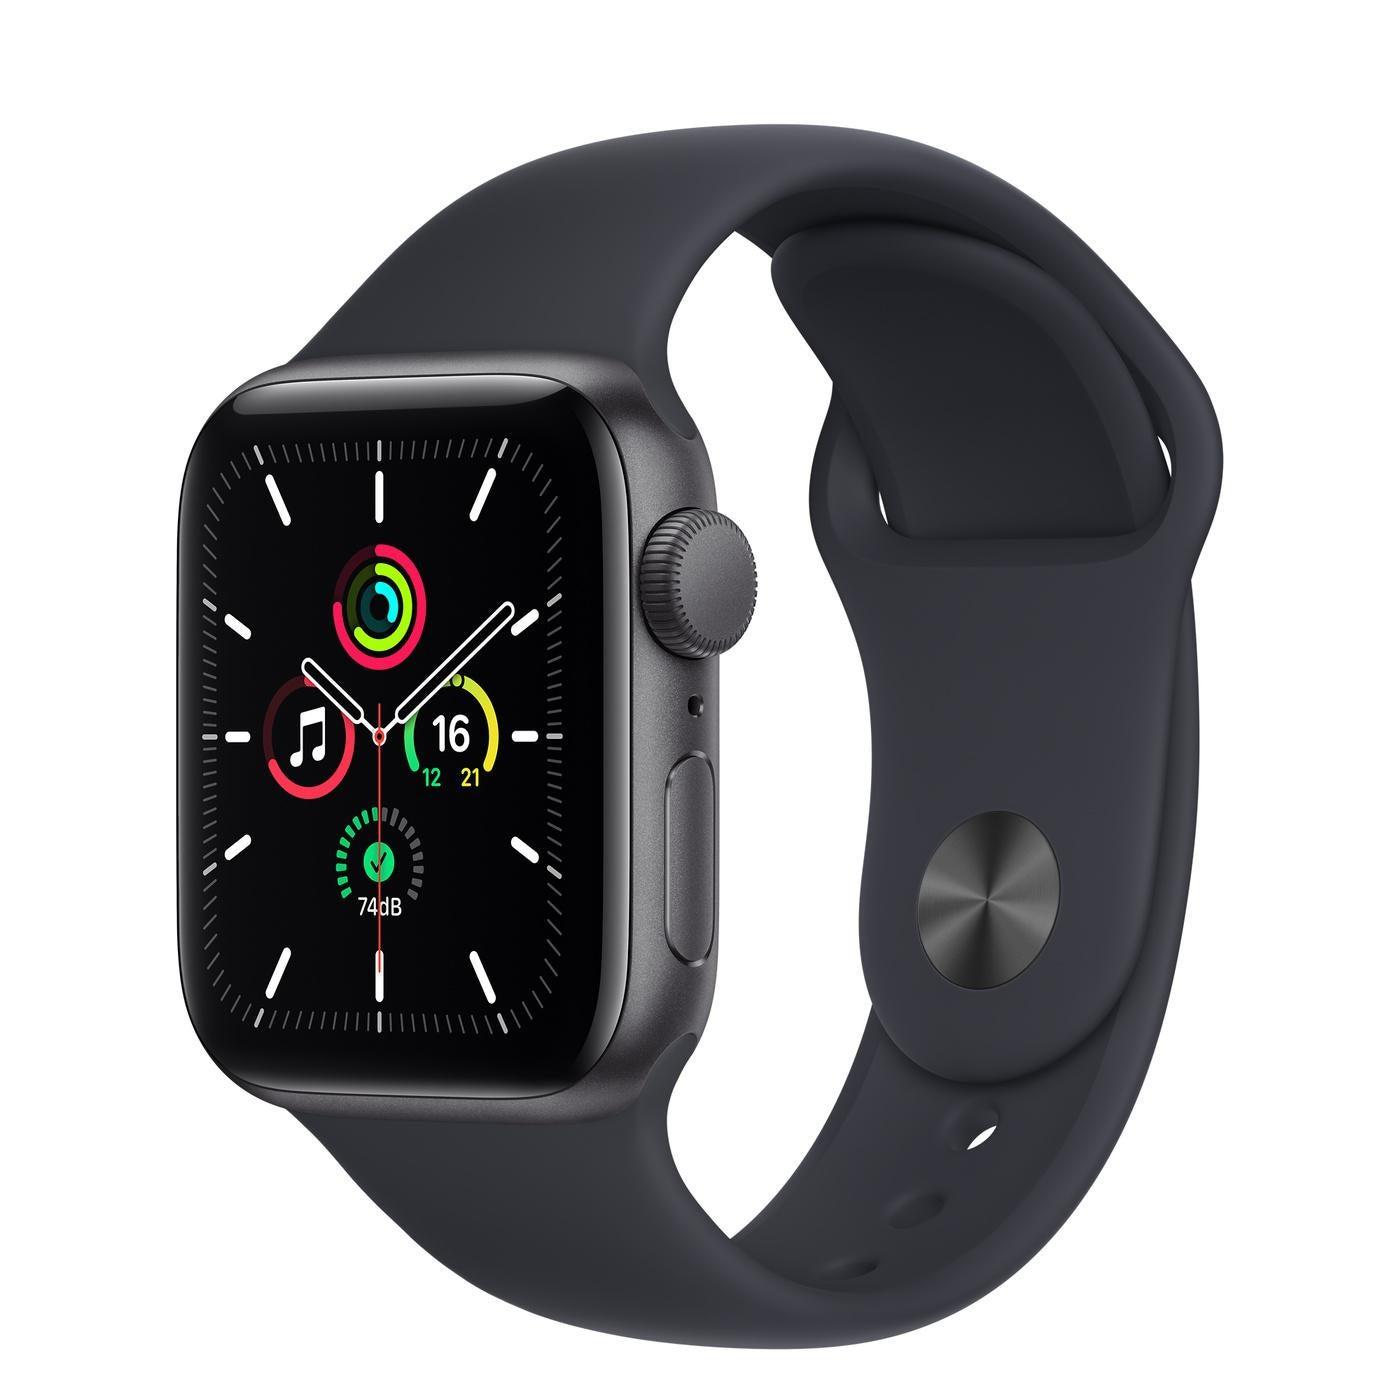 Apple Watch SE 44mm Space Grey Cellular - Very Good - Refurbished